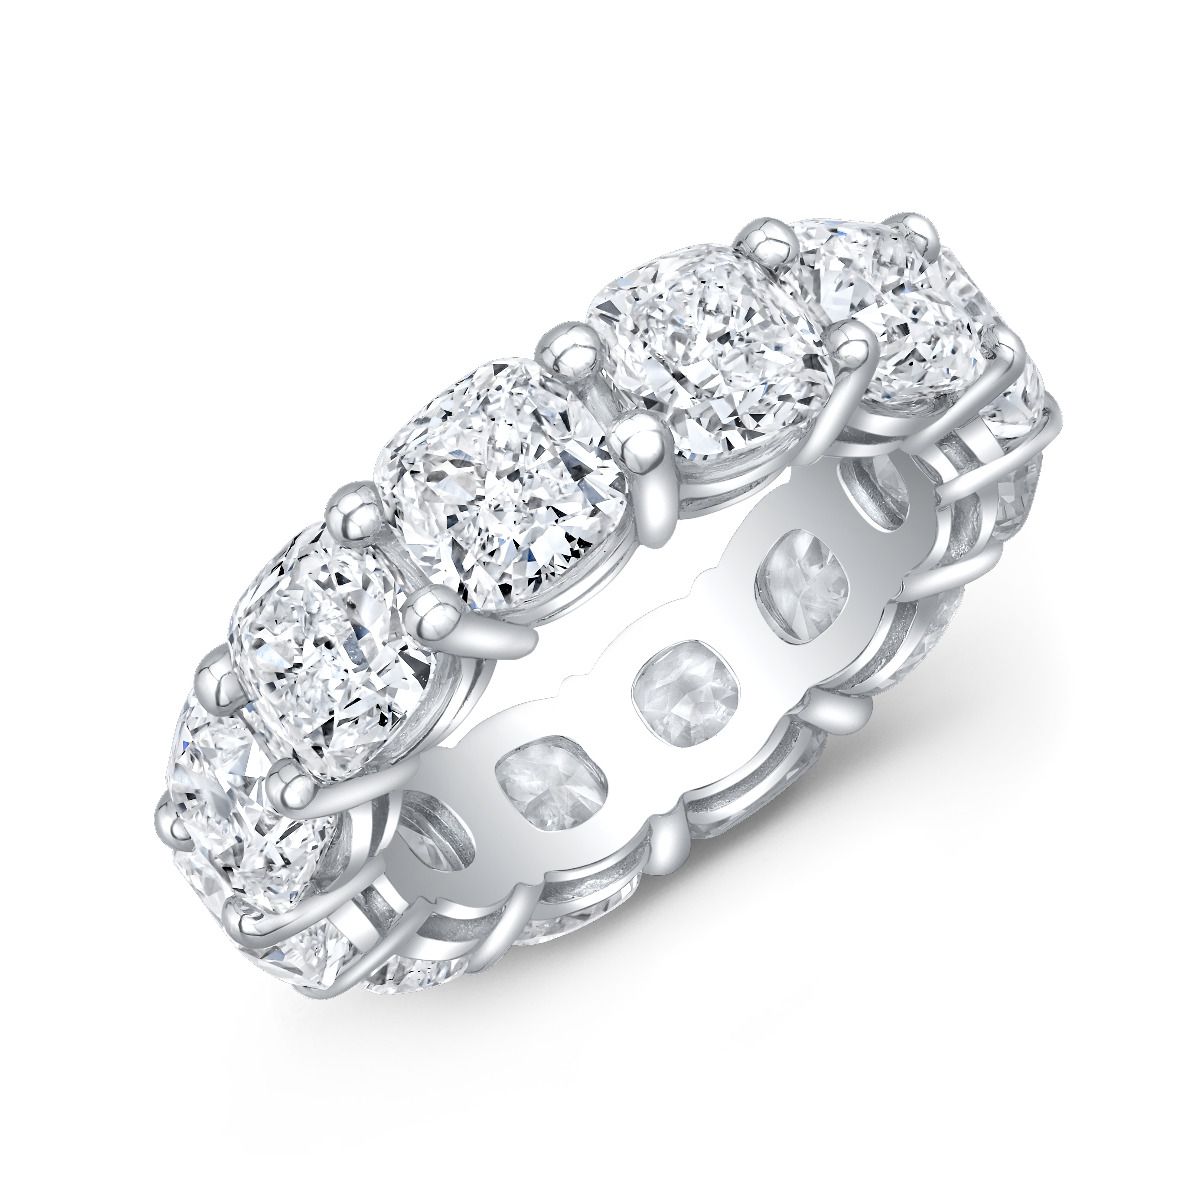 Stunning 8 carat cushion eternity band in white gold